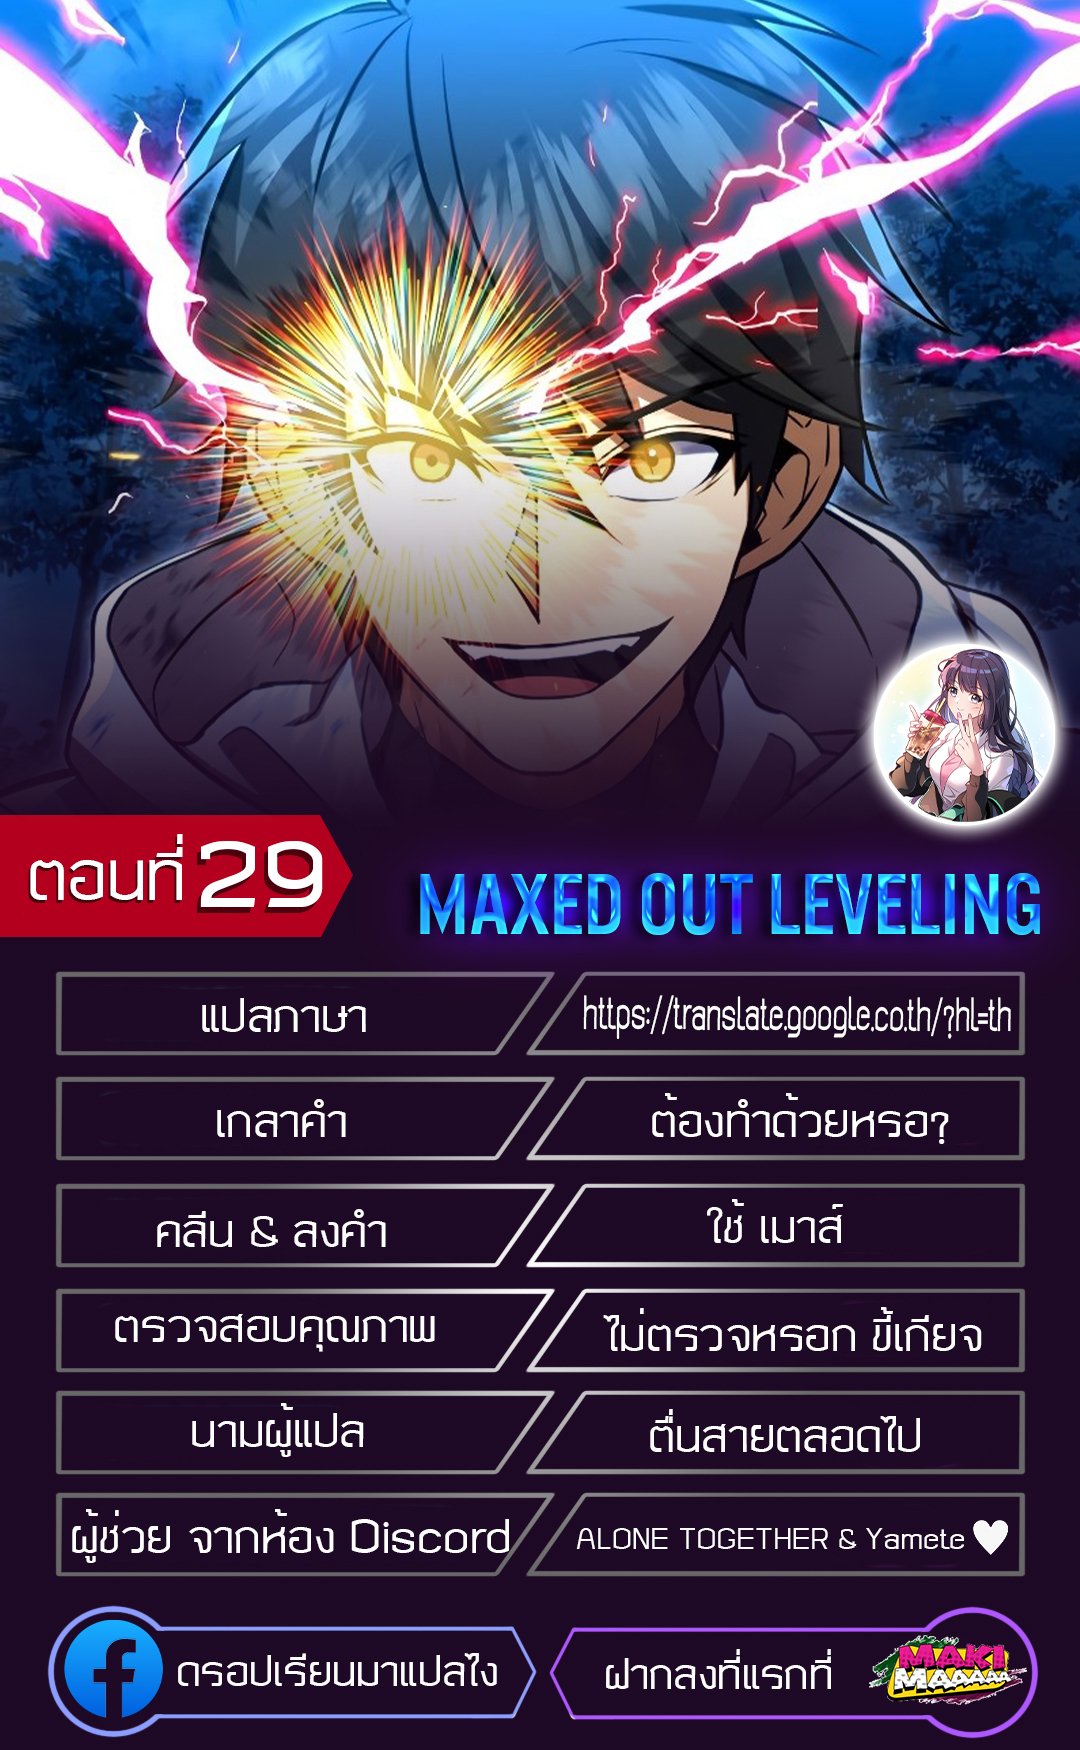 Maxed Out Leveling29 1